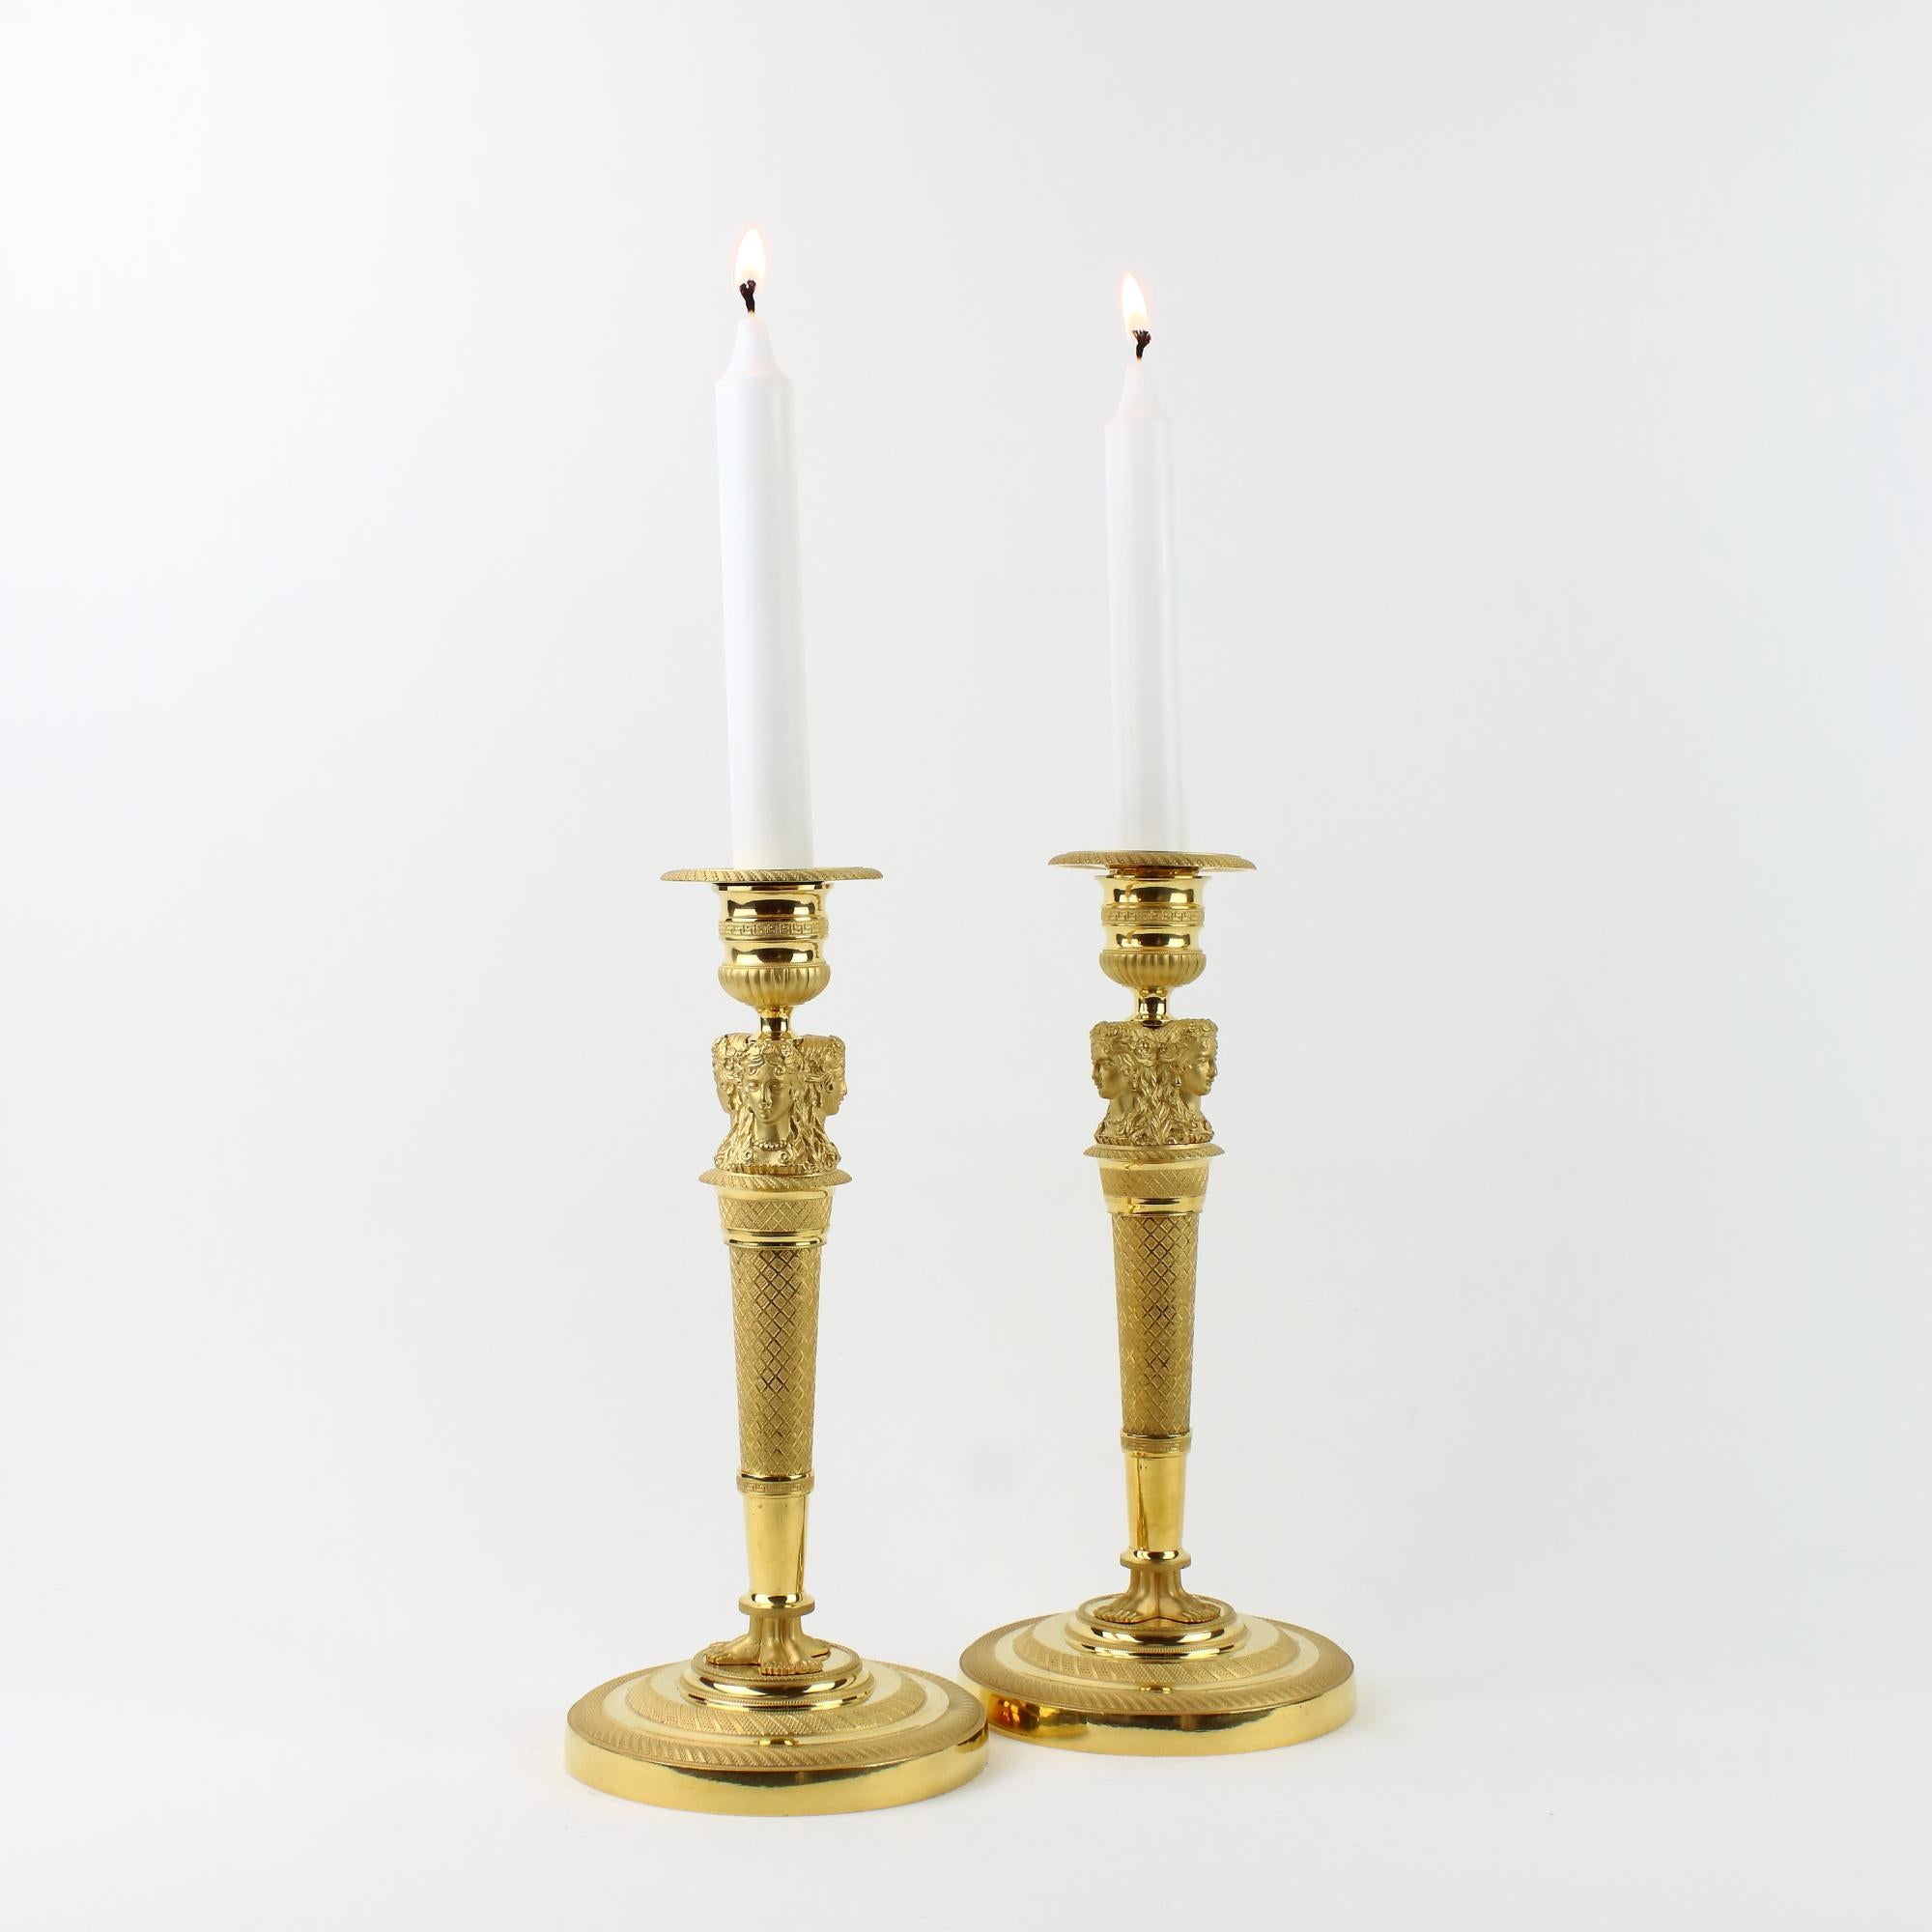 Pair of Early 19th Century French Empire Ormolu Gilt Bronze Female Busts Candlesticks, circa 1820

A beautiful pair of Empire gilt-bronze ormolu candlesticks decorated with three female busts or caryatids, their hair being decorated with flower